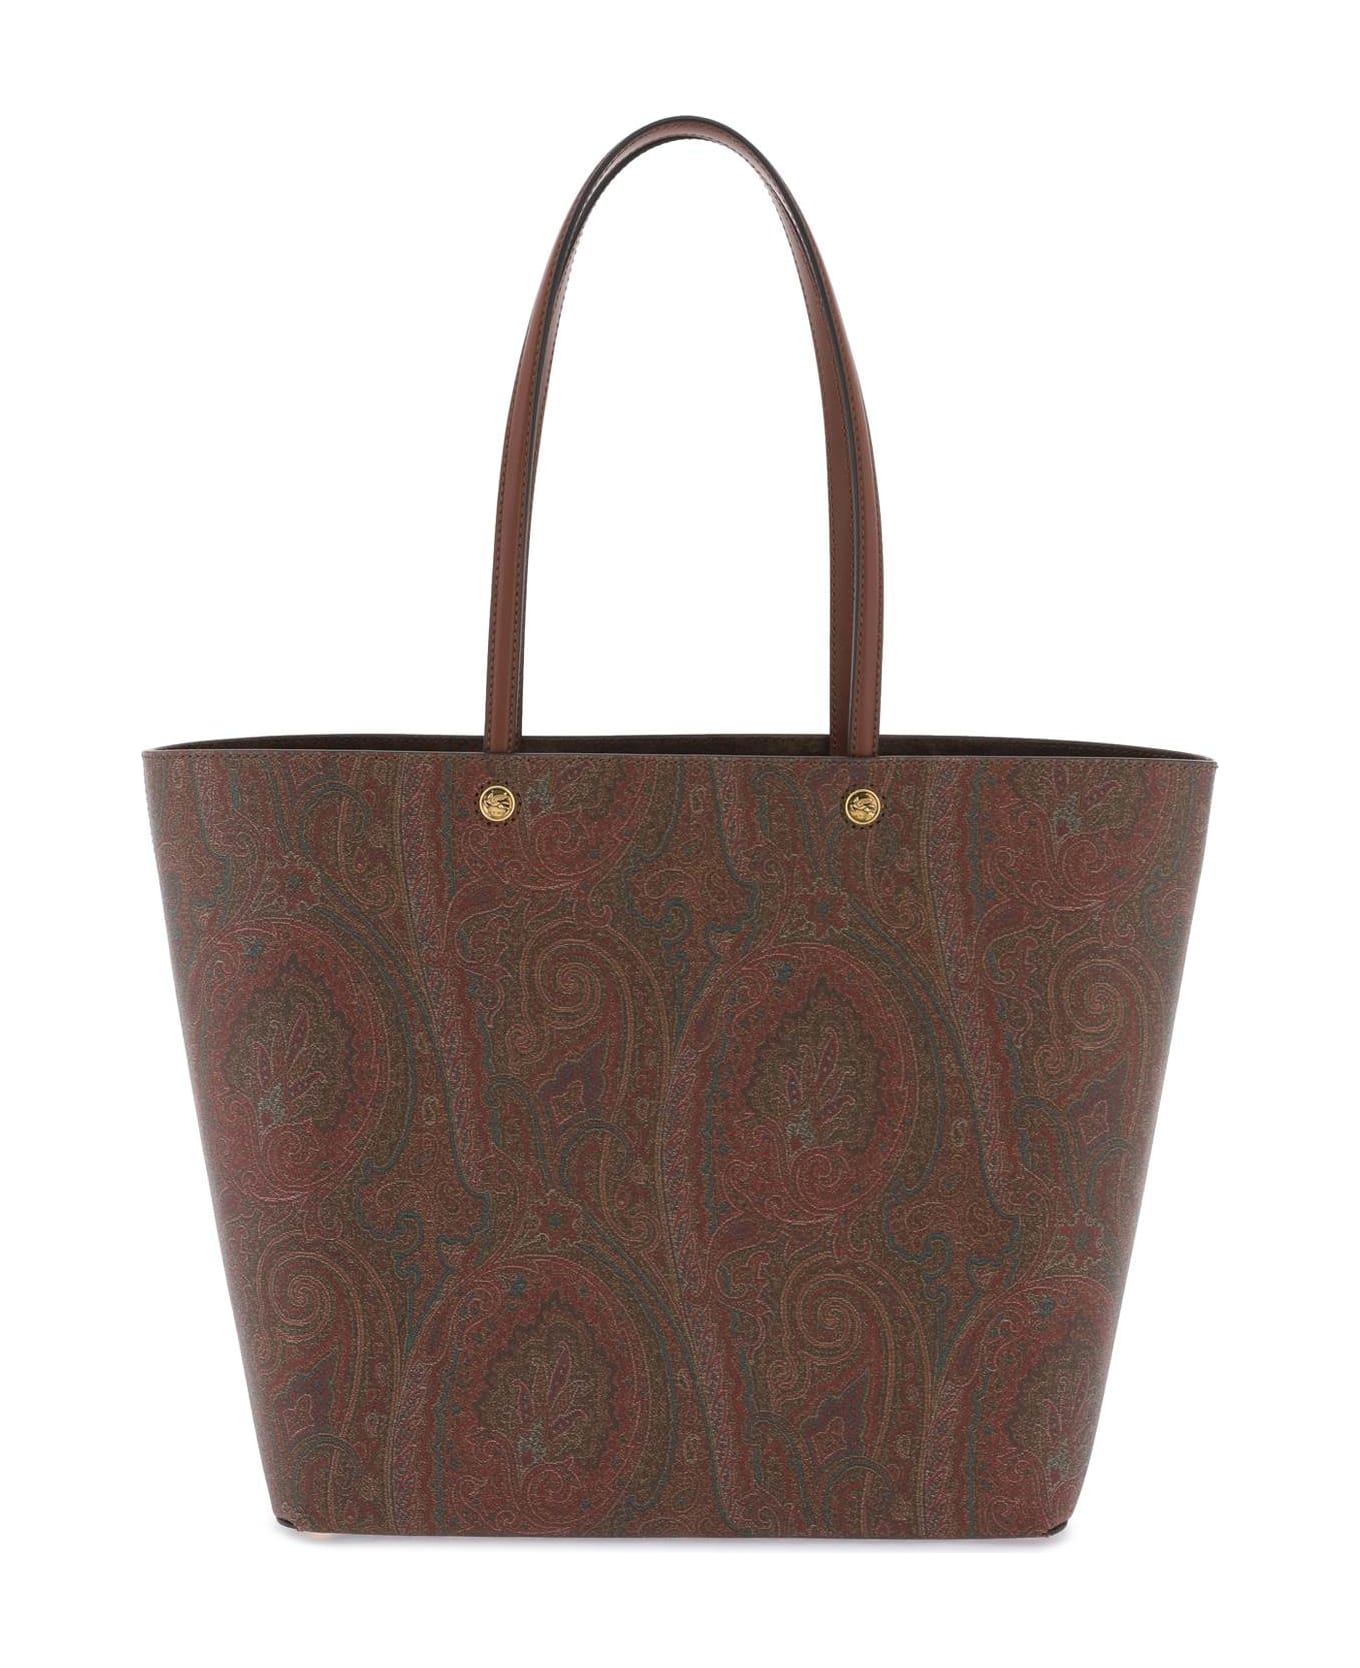 Etro Brown Leather Blend Bag - MARRONE SCURO 2 (Brown)